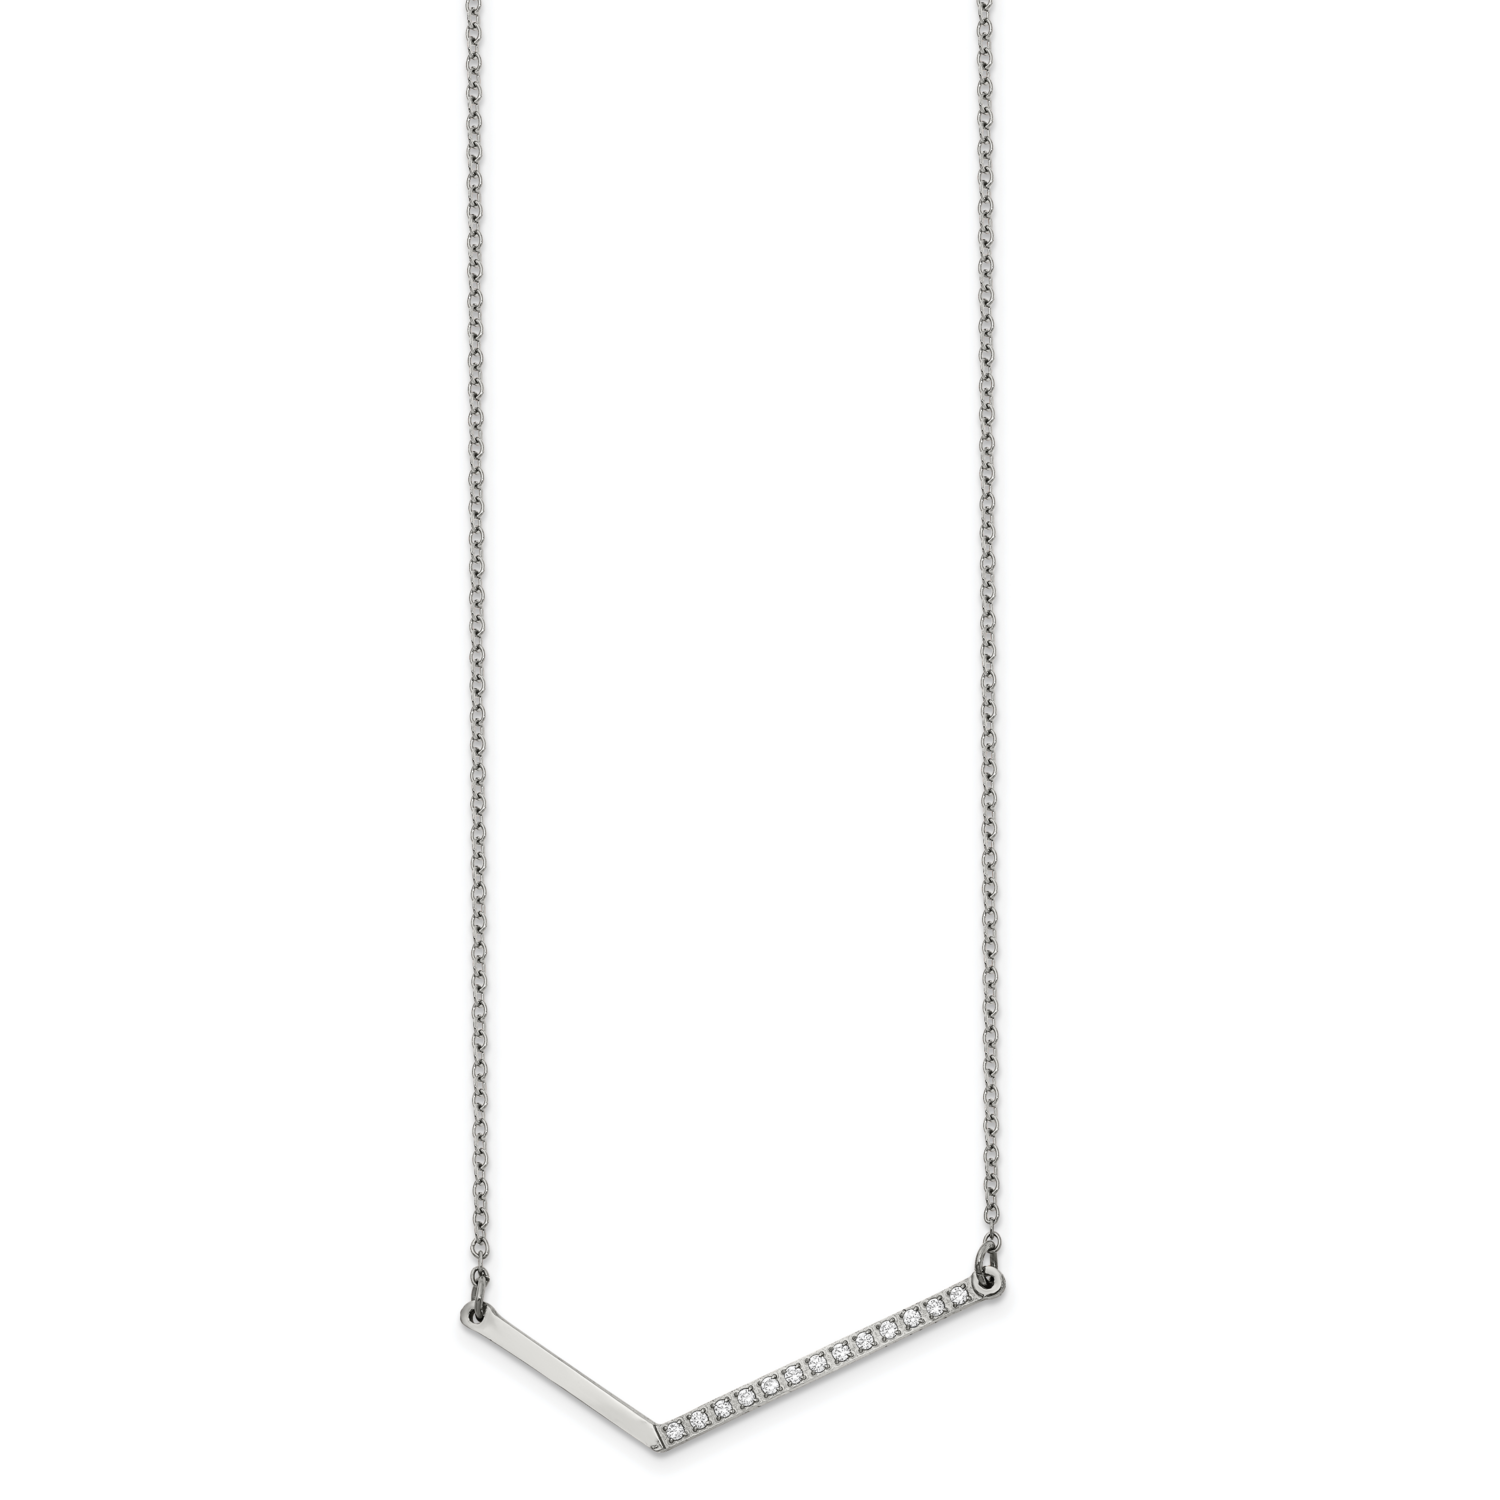 CZ Stone Stone Angled Bar 17.5 Inch Necklace Stainless Steel Polished SRN2656-17.5